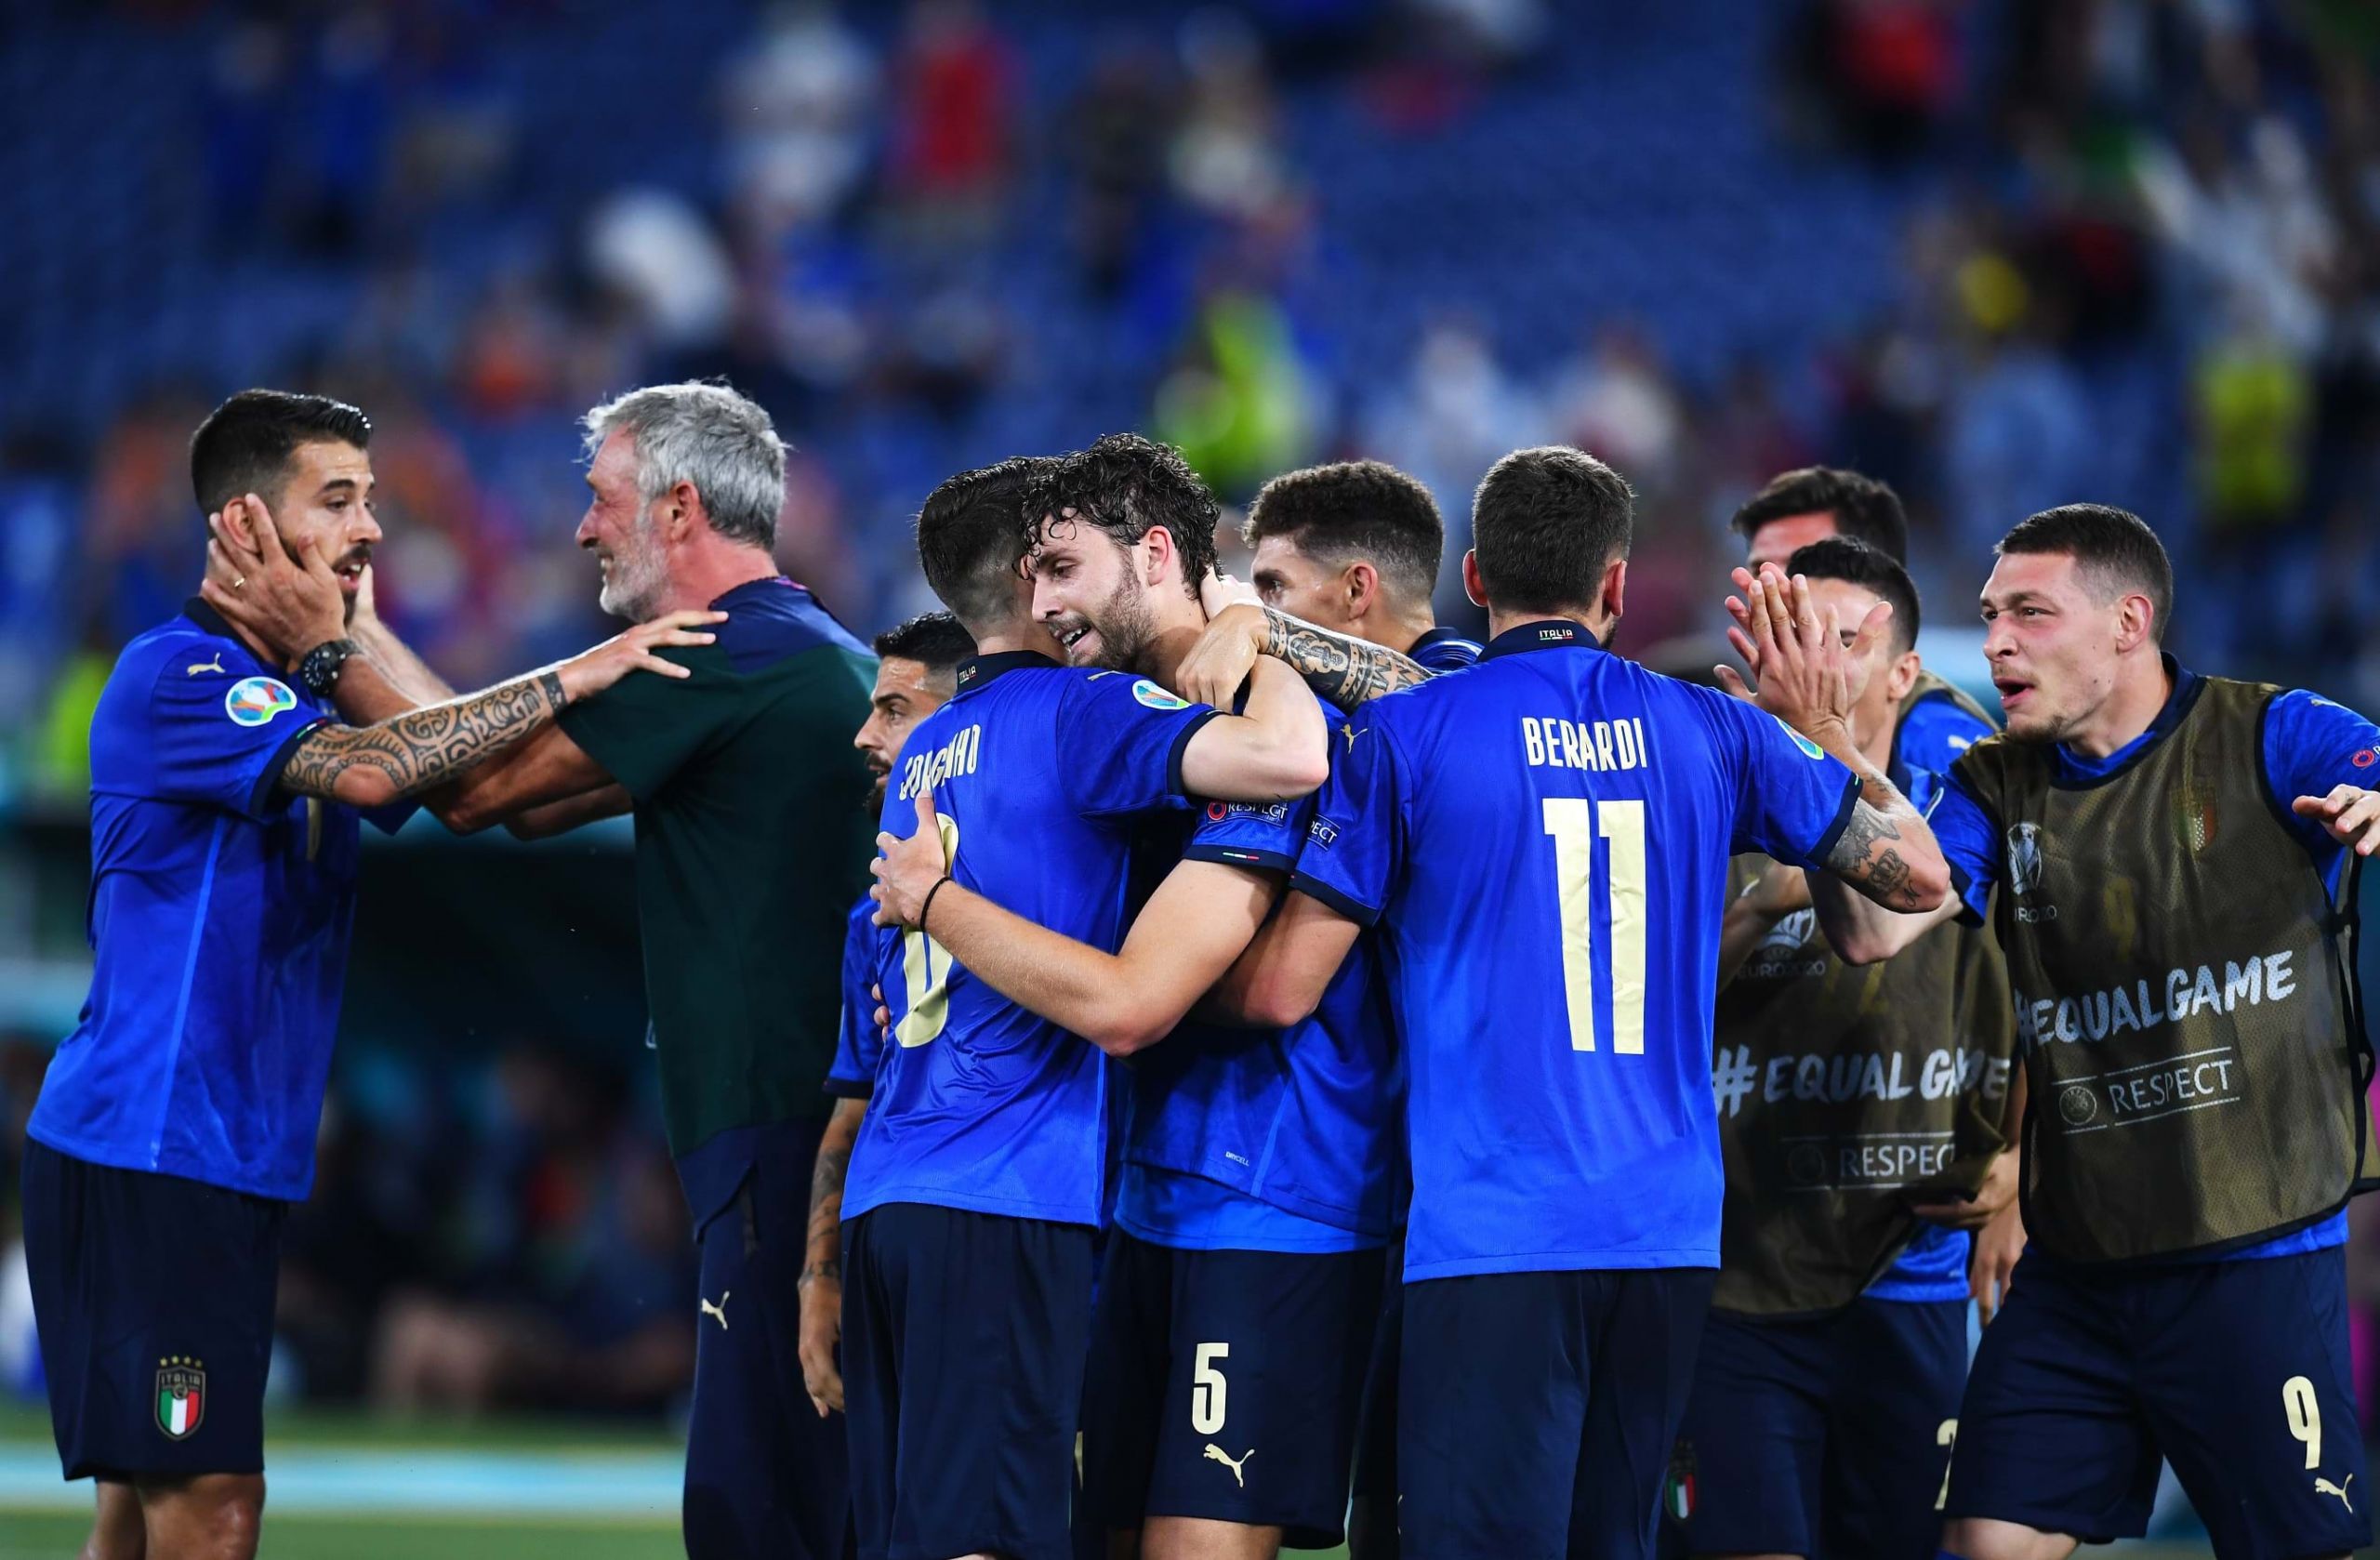 Luciano Spalletti will issue the Italy squad for the Euro qualifiers versus Malta and England on Friday while dealing with a few injury concerns.